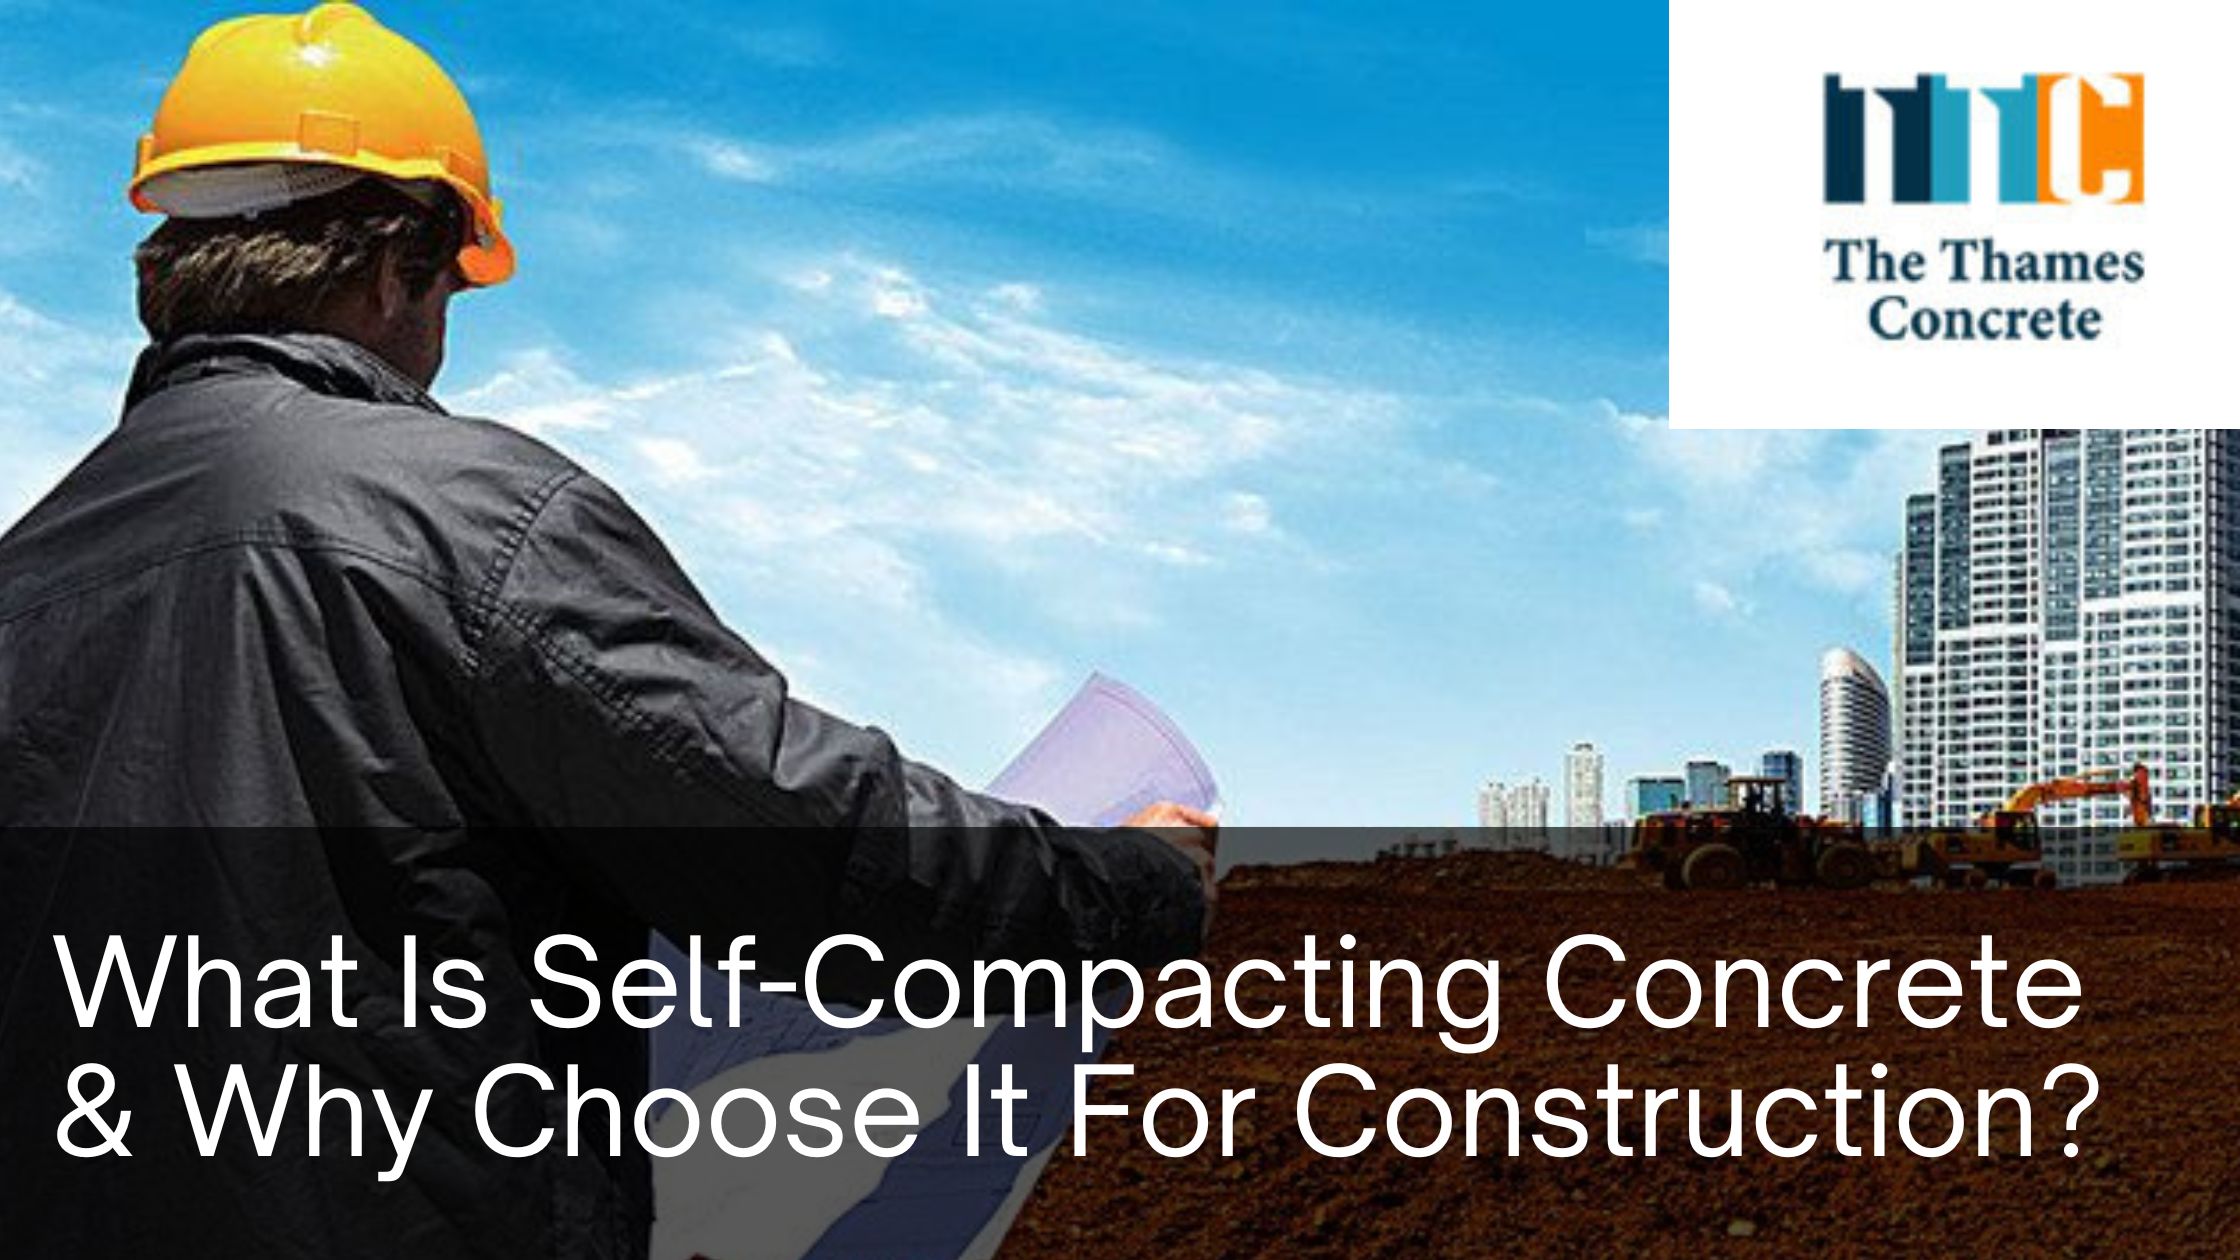 What Is Self-Compacting Concrete and Why Choose It For Construction?